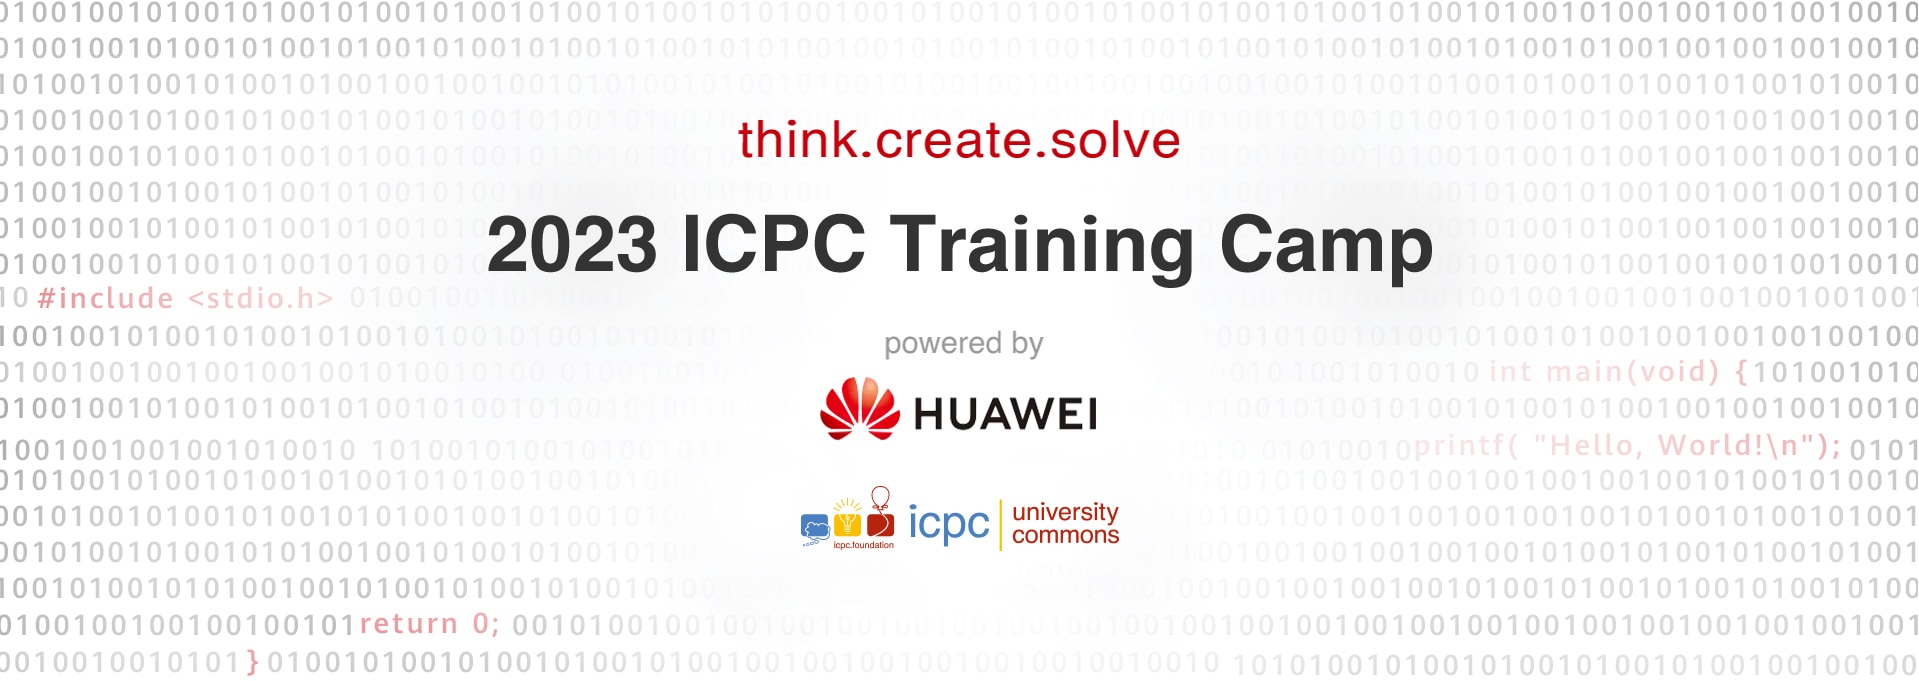 ICPC Training Camp powered by HUAWEI